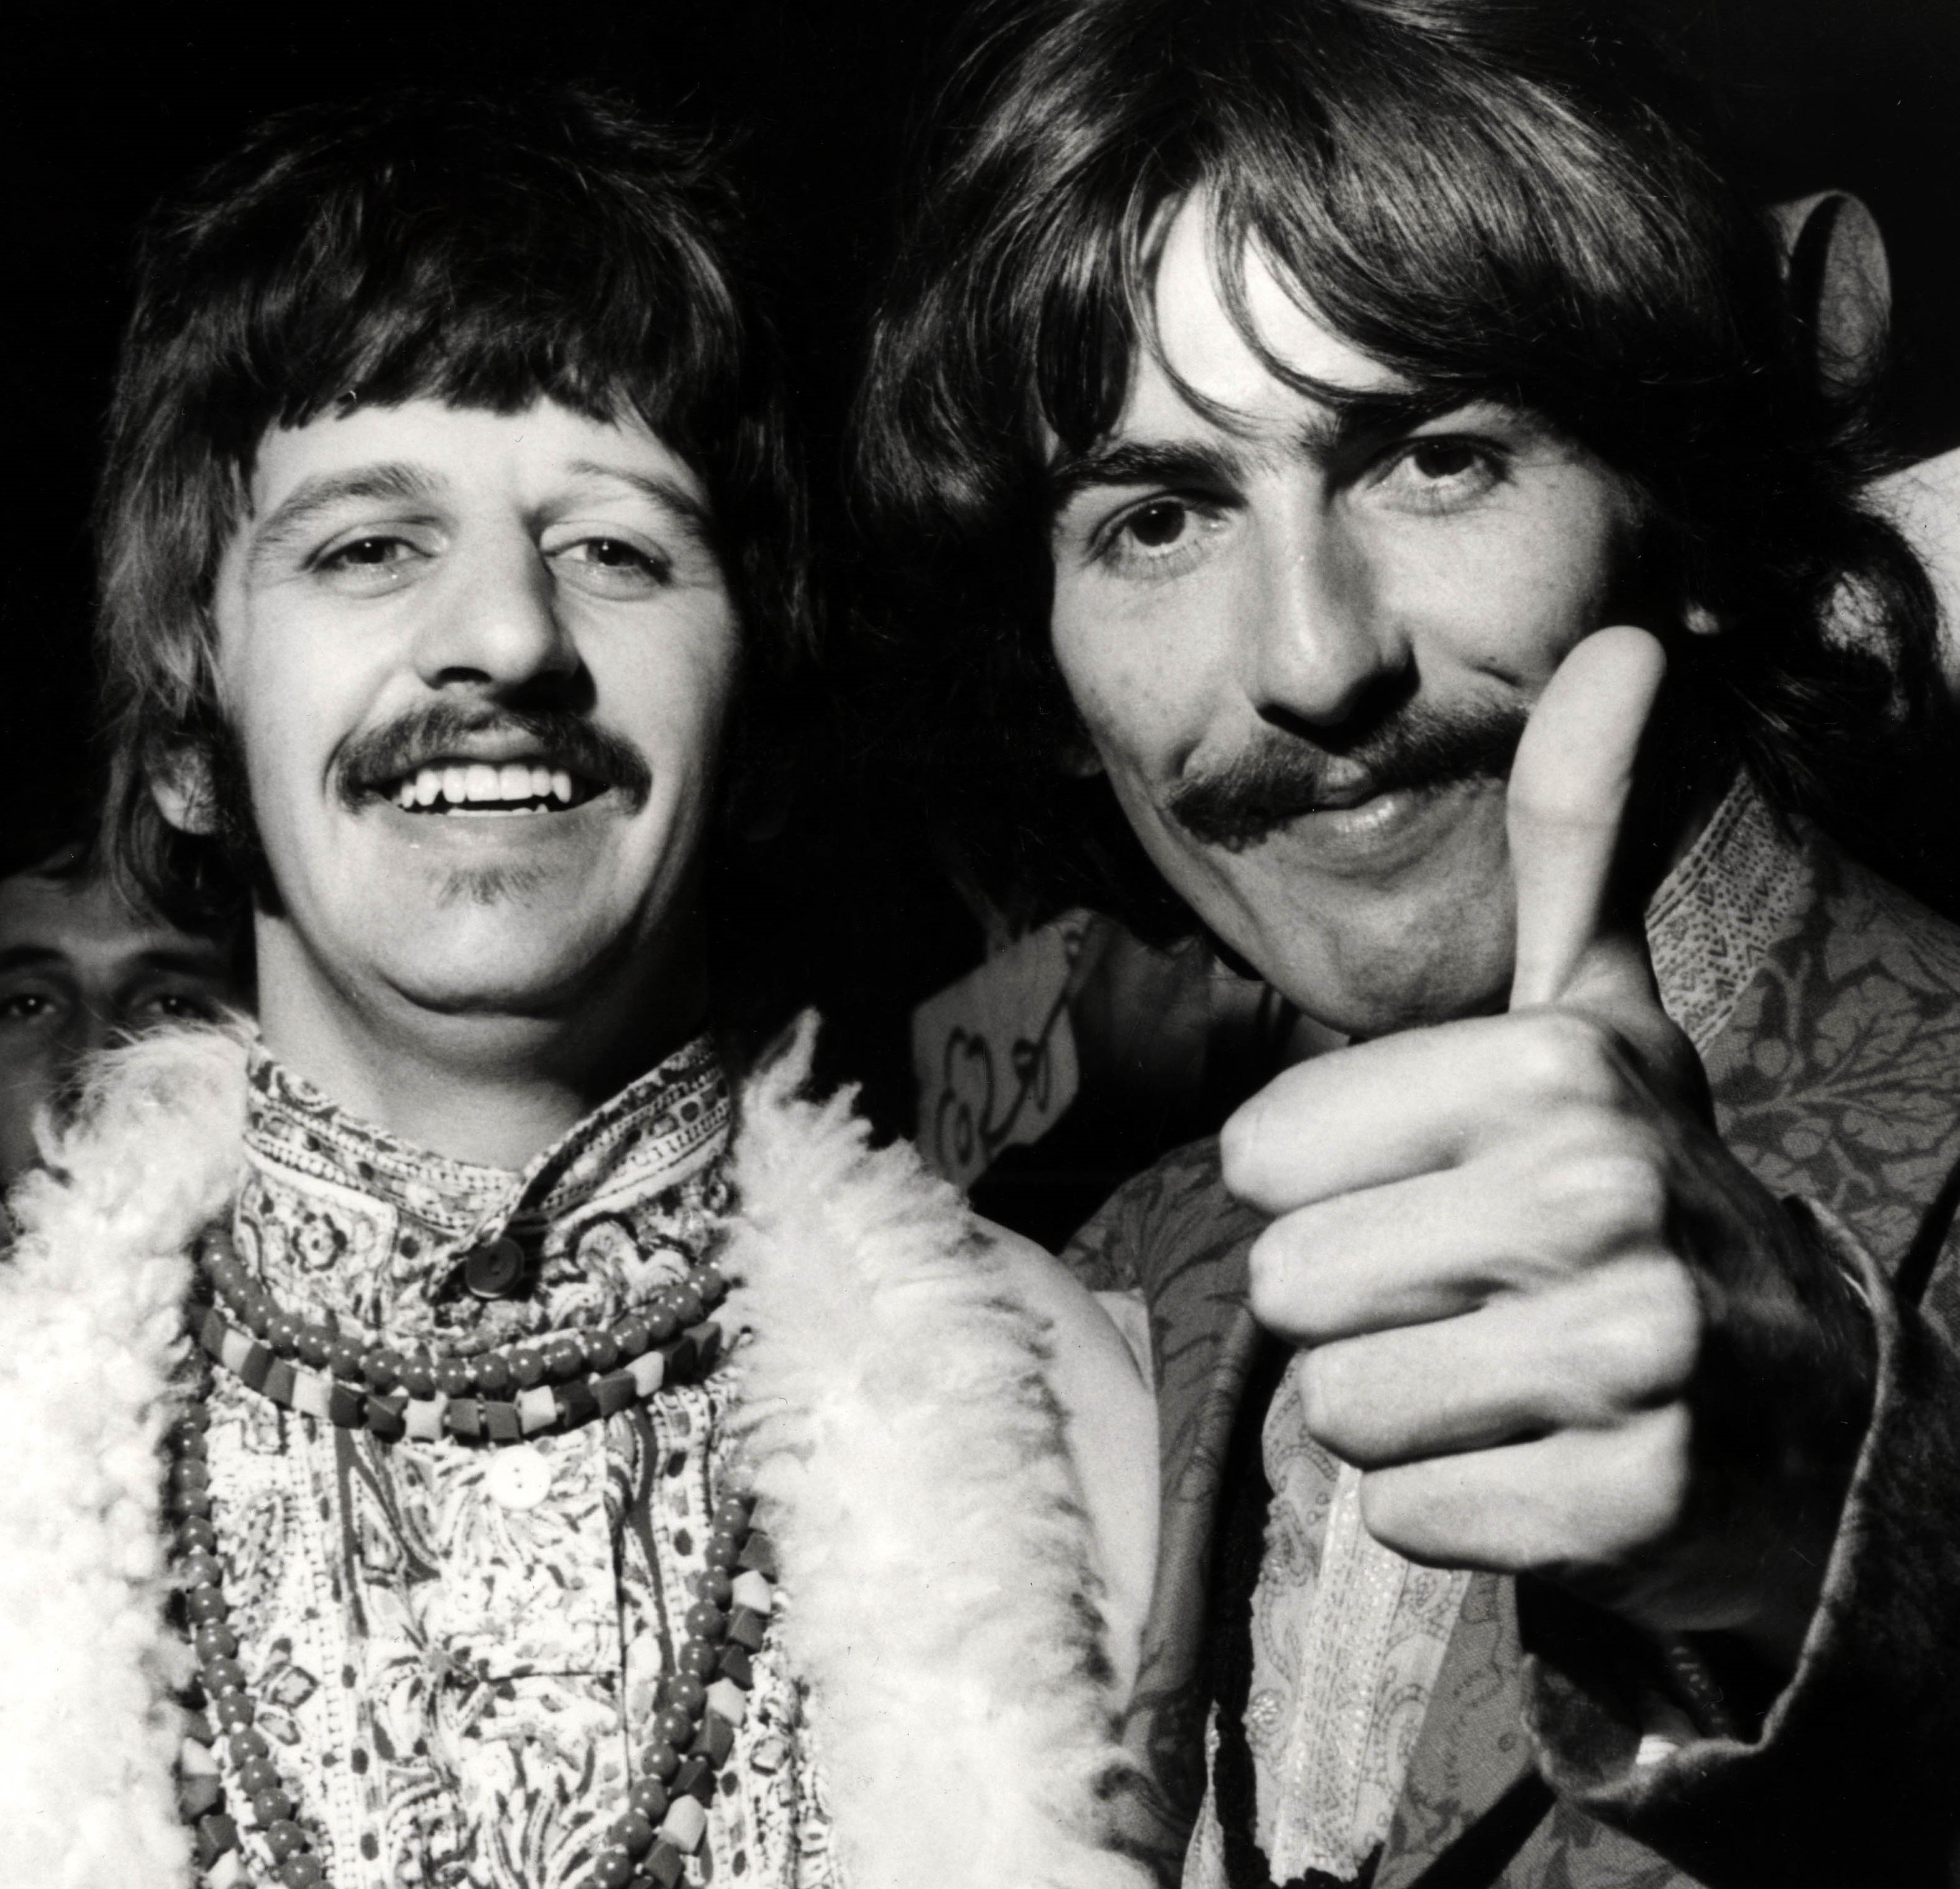 The Beatles' Ringo Starr and George Harrison in black-and-white